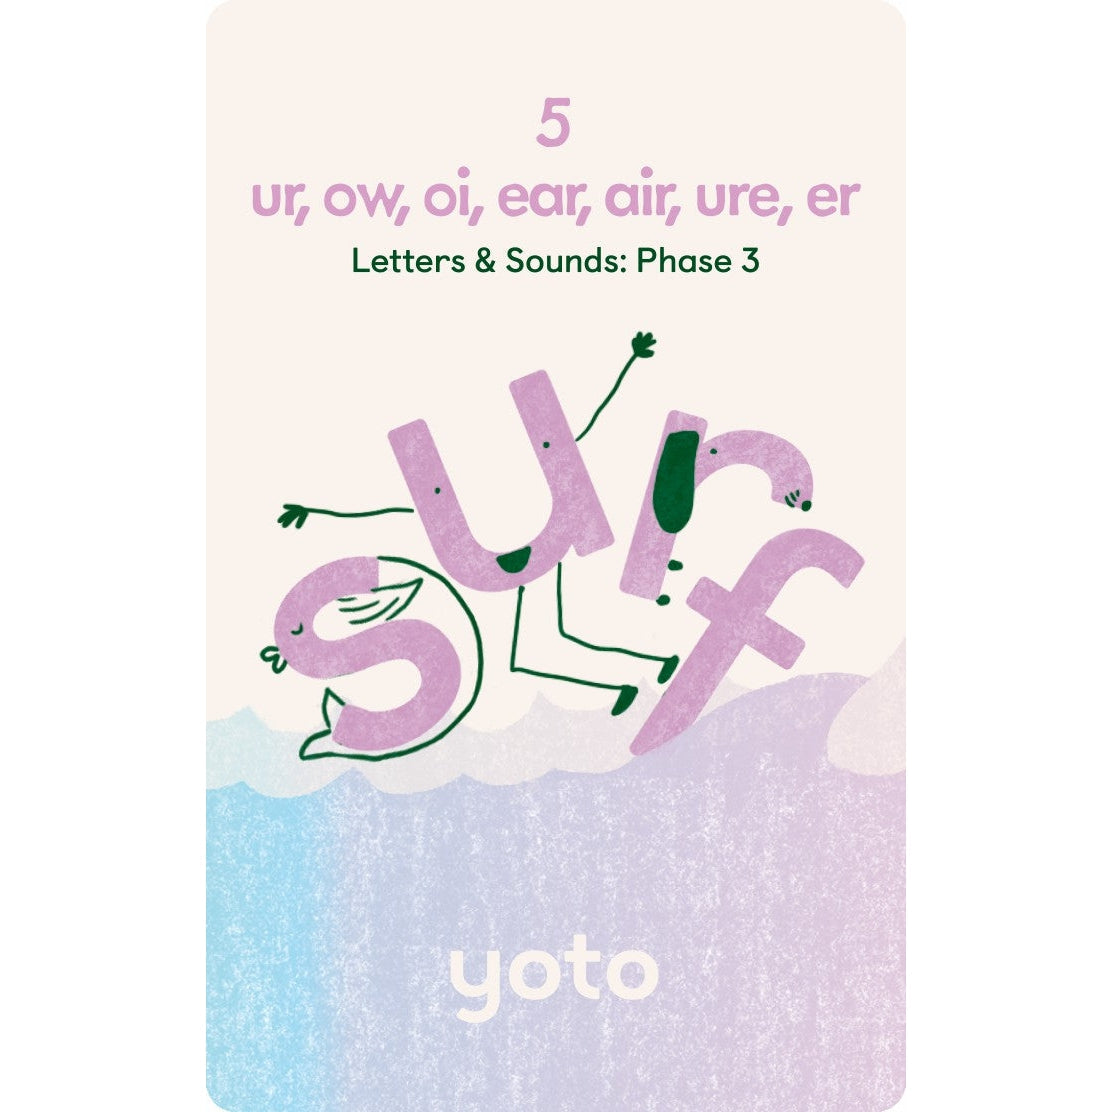 Yoto Cards - Phonics Letters and Sounds - Phase 3 - Cards for Yoto Audio Player